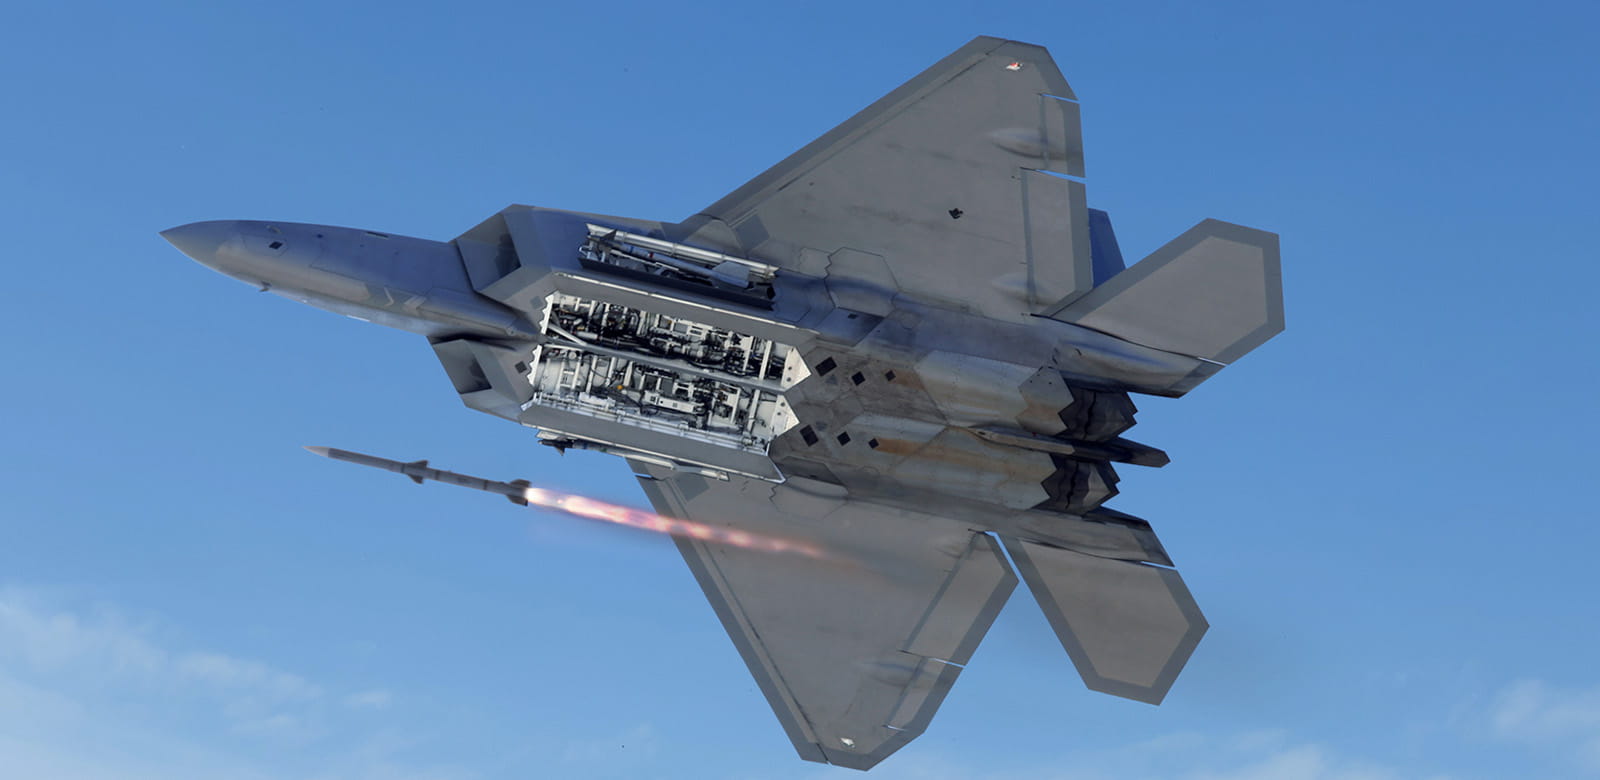 The AMRAAM® missile is carried by the F-15, F-16, F/A-18, F-22, Typhoon, Gripen, Tornado and Harrier. It’s the only air-to-air missile used on the F-35.